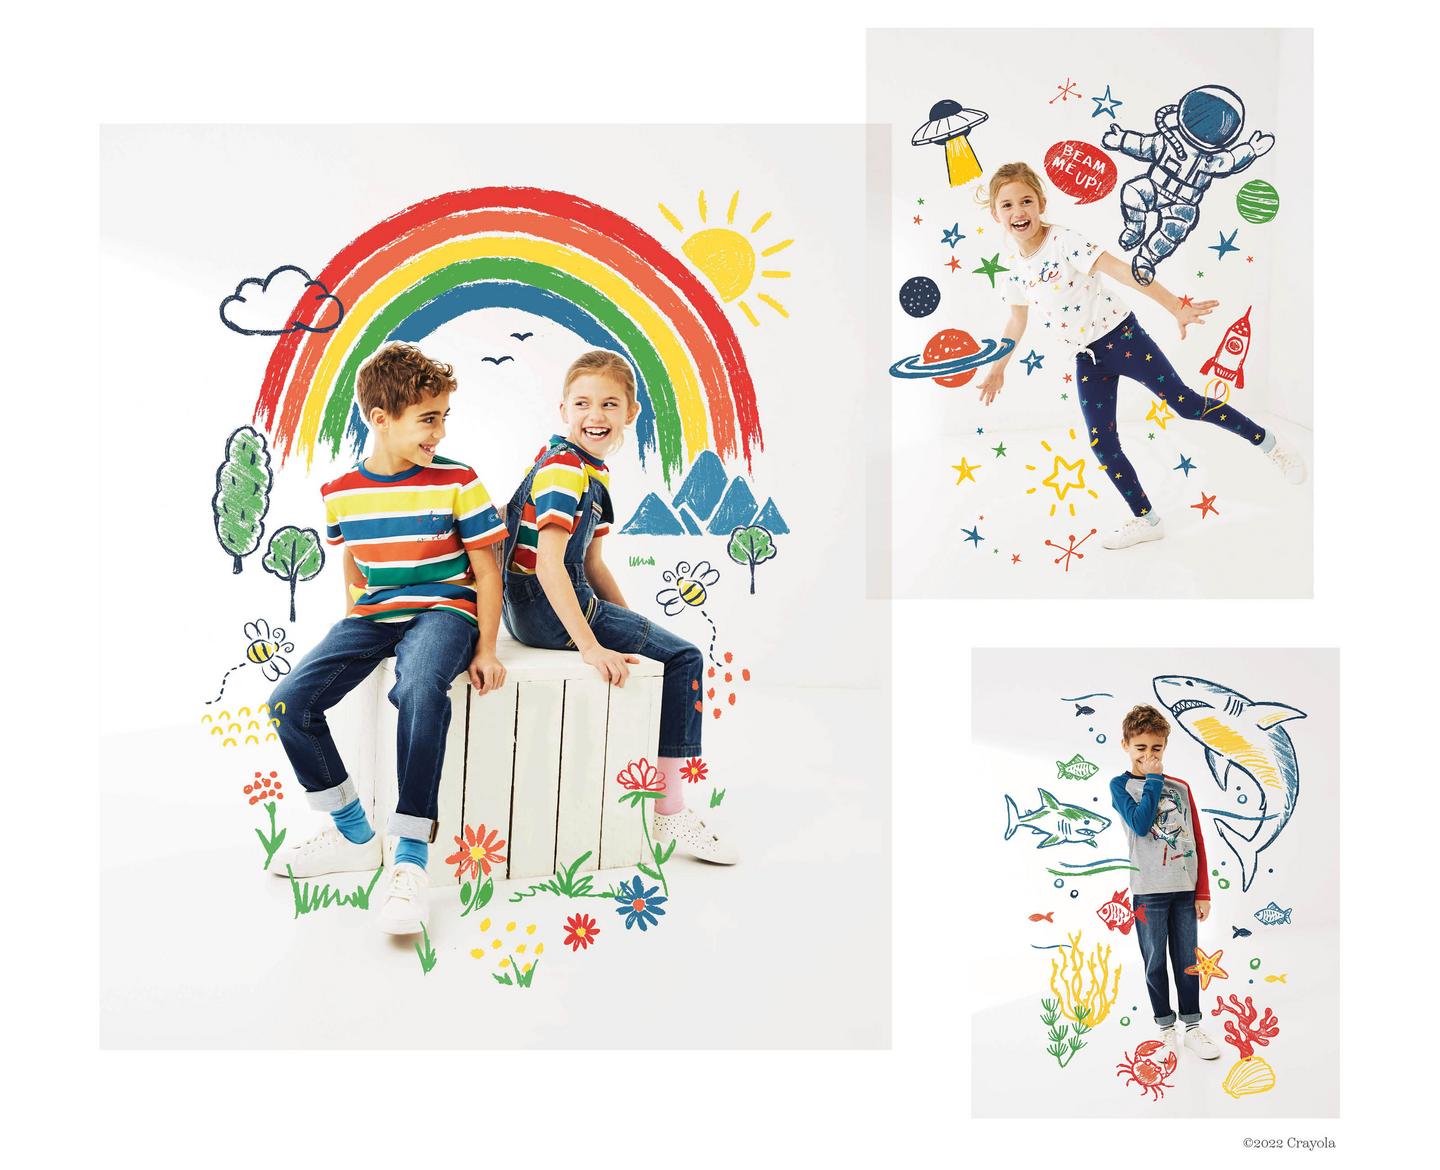 A boy & girl wearing matching rainbow striped T-shirts with blue denim jeans & dungarees, surrounded by colourful doodles.